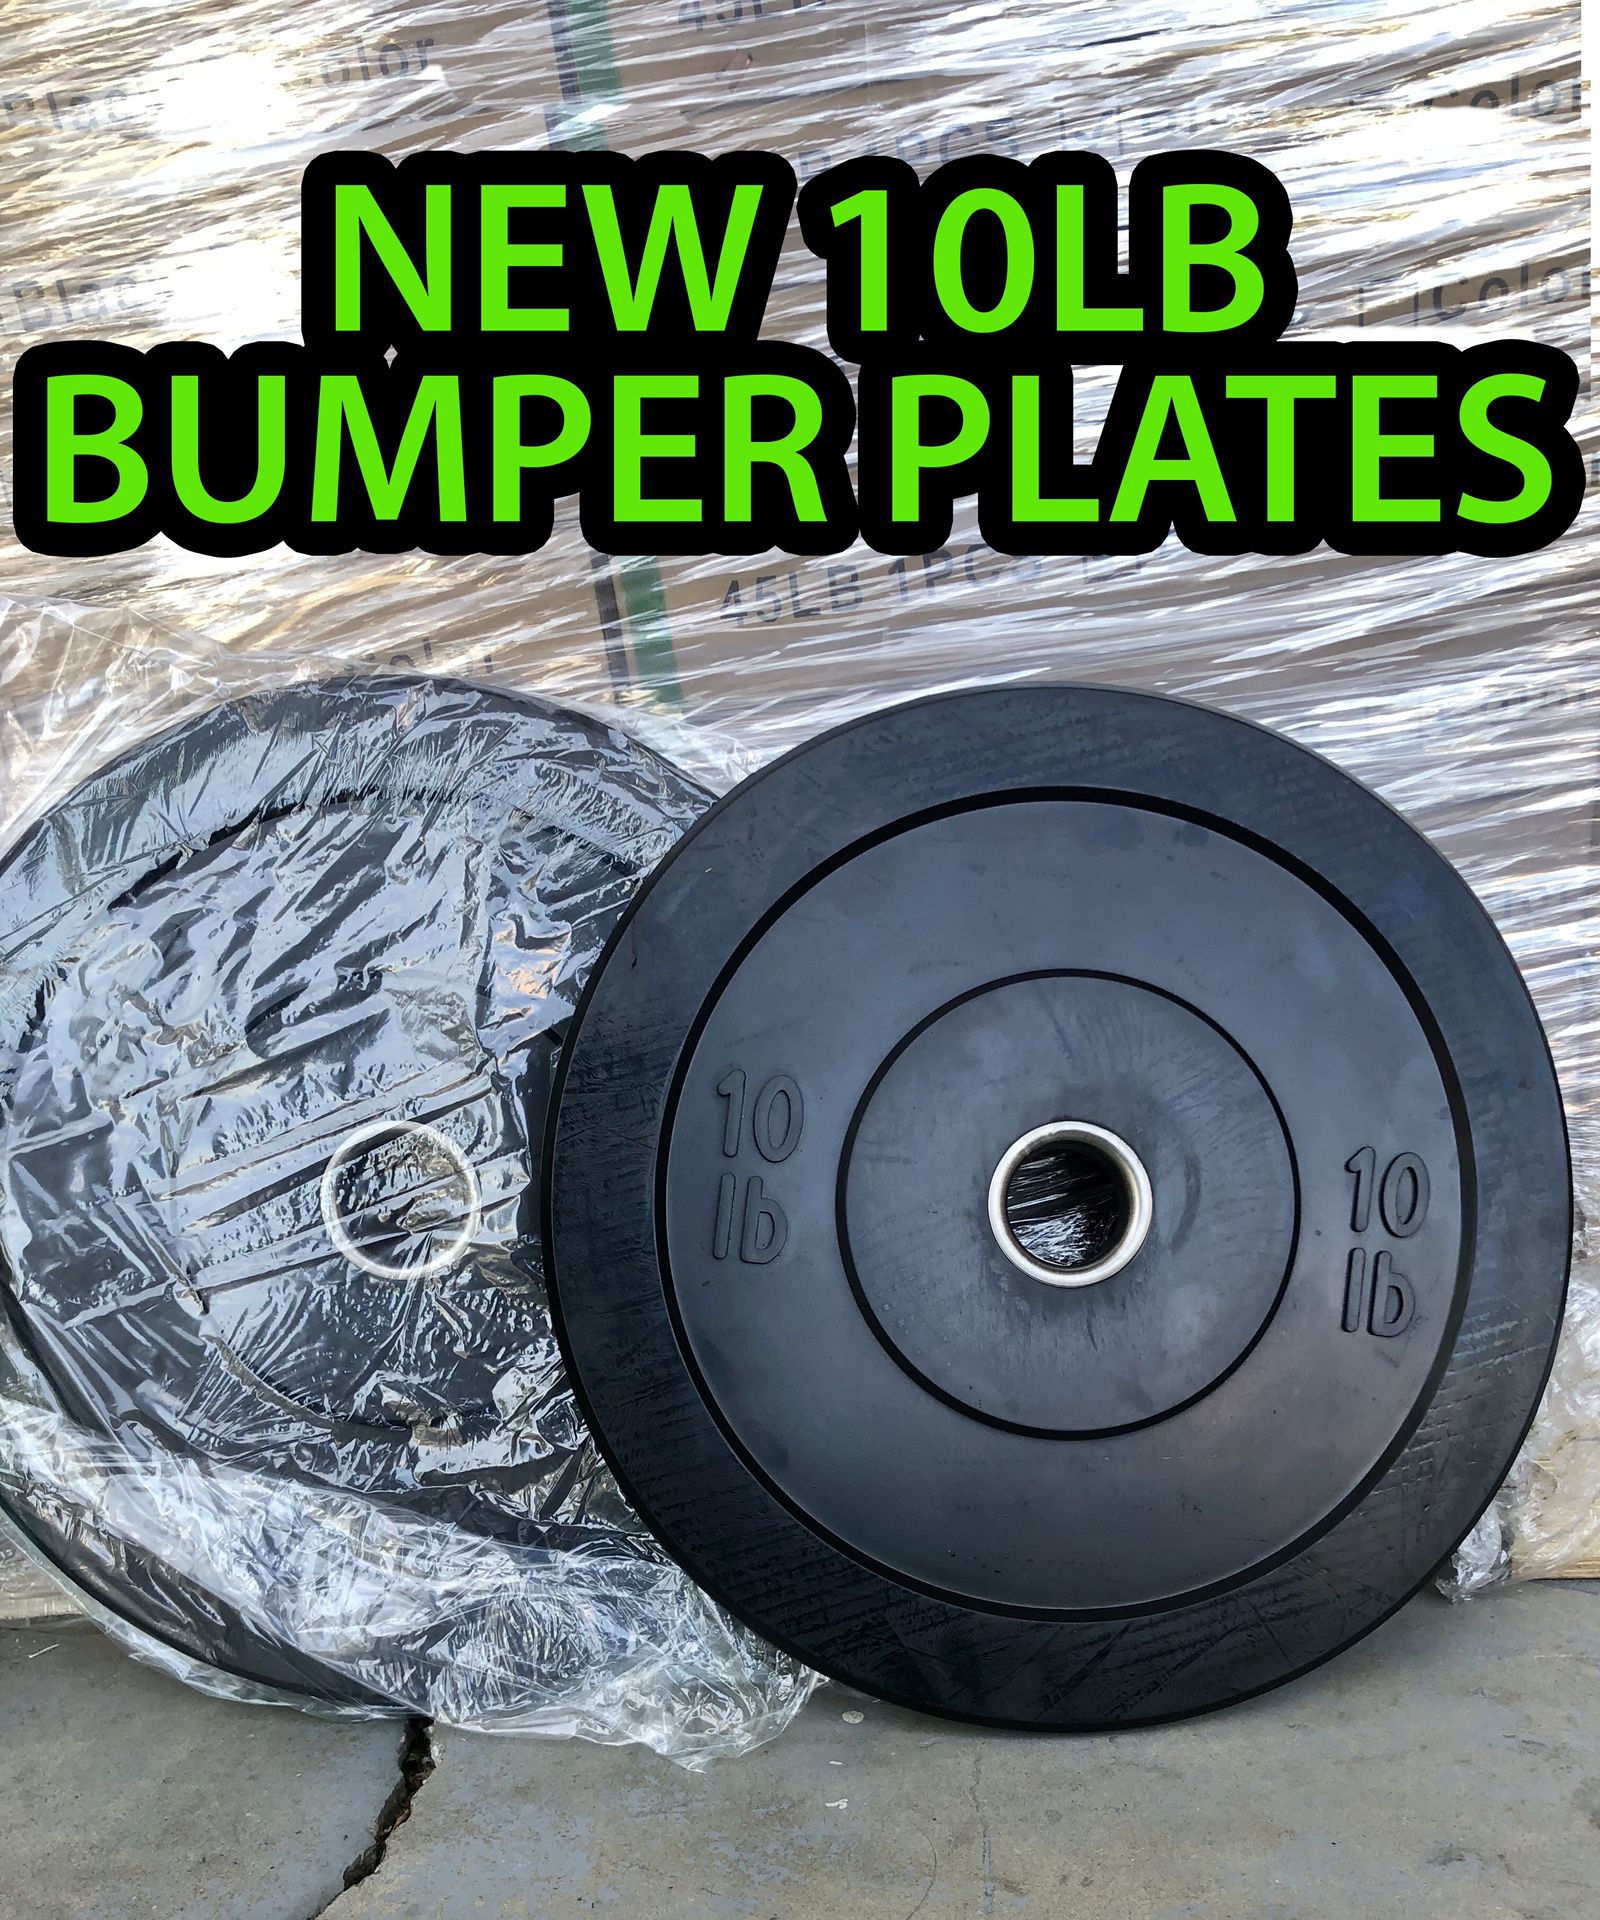 10lb Olympic Bumper Plates 100% Rubber NEW weights Home Gym Weightlifting